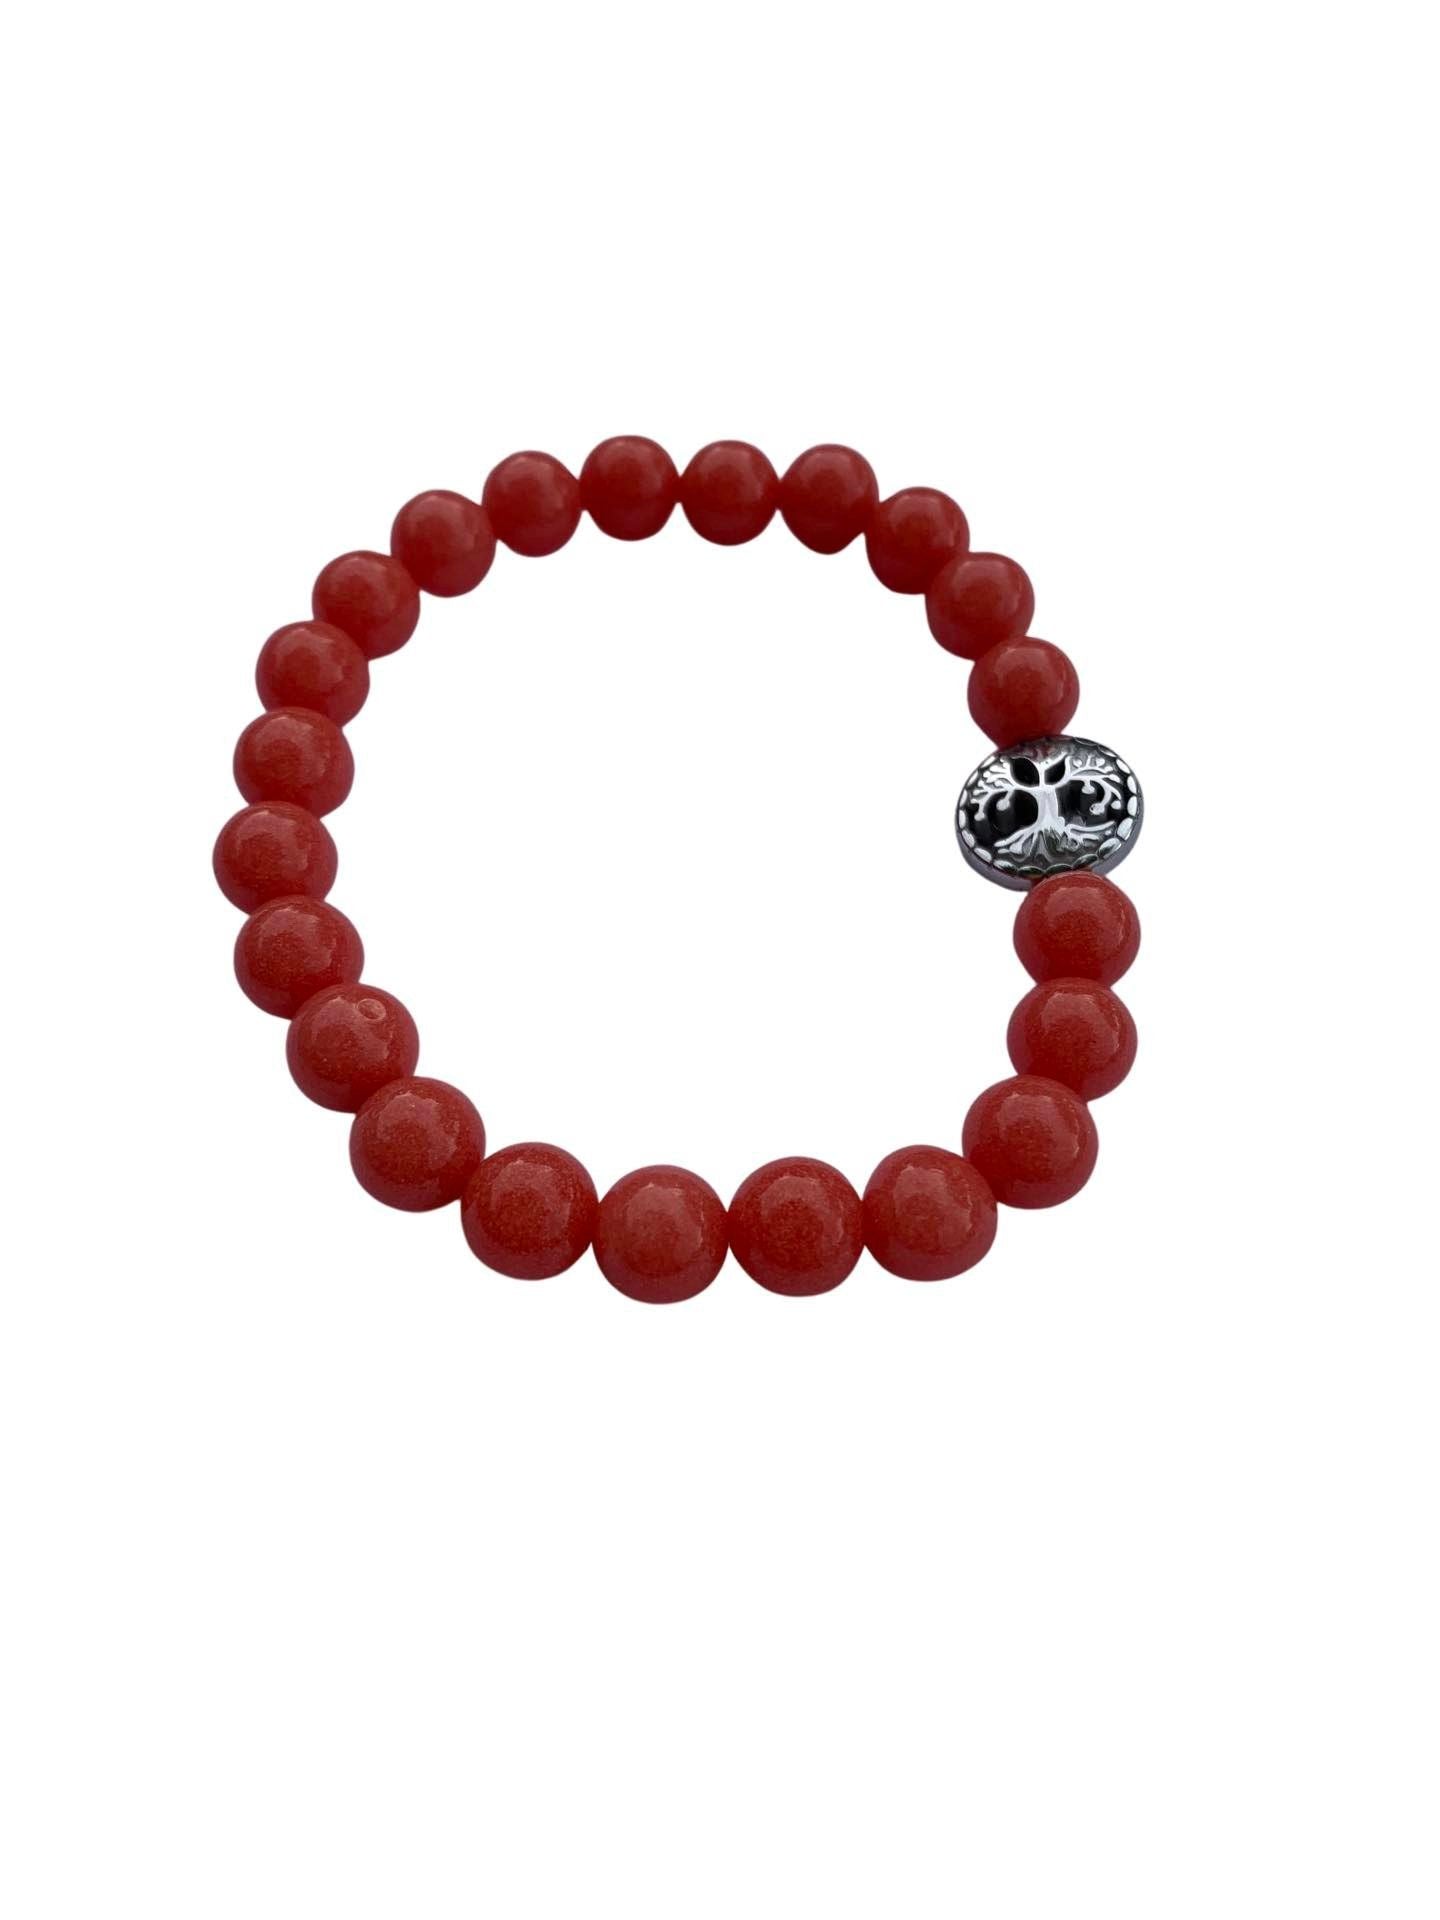 Aragonite Coral Bracelet 8 mm Round Beads - Naturally Glows in the Dark